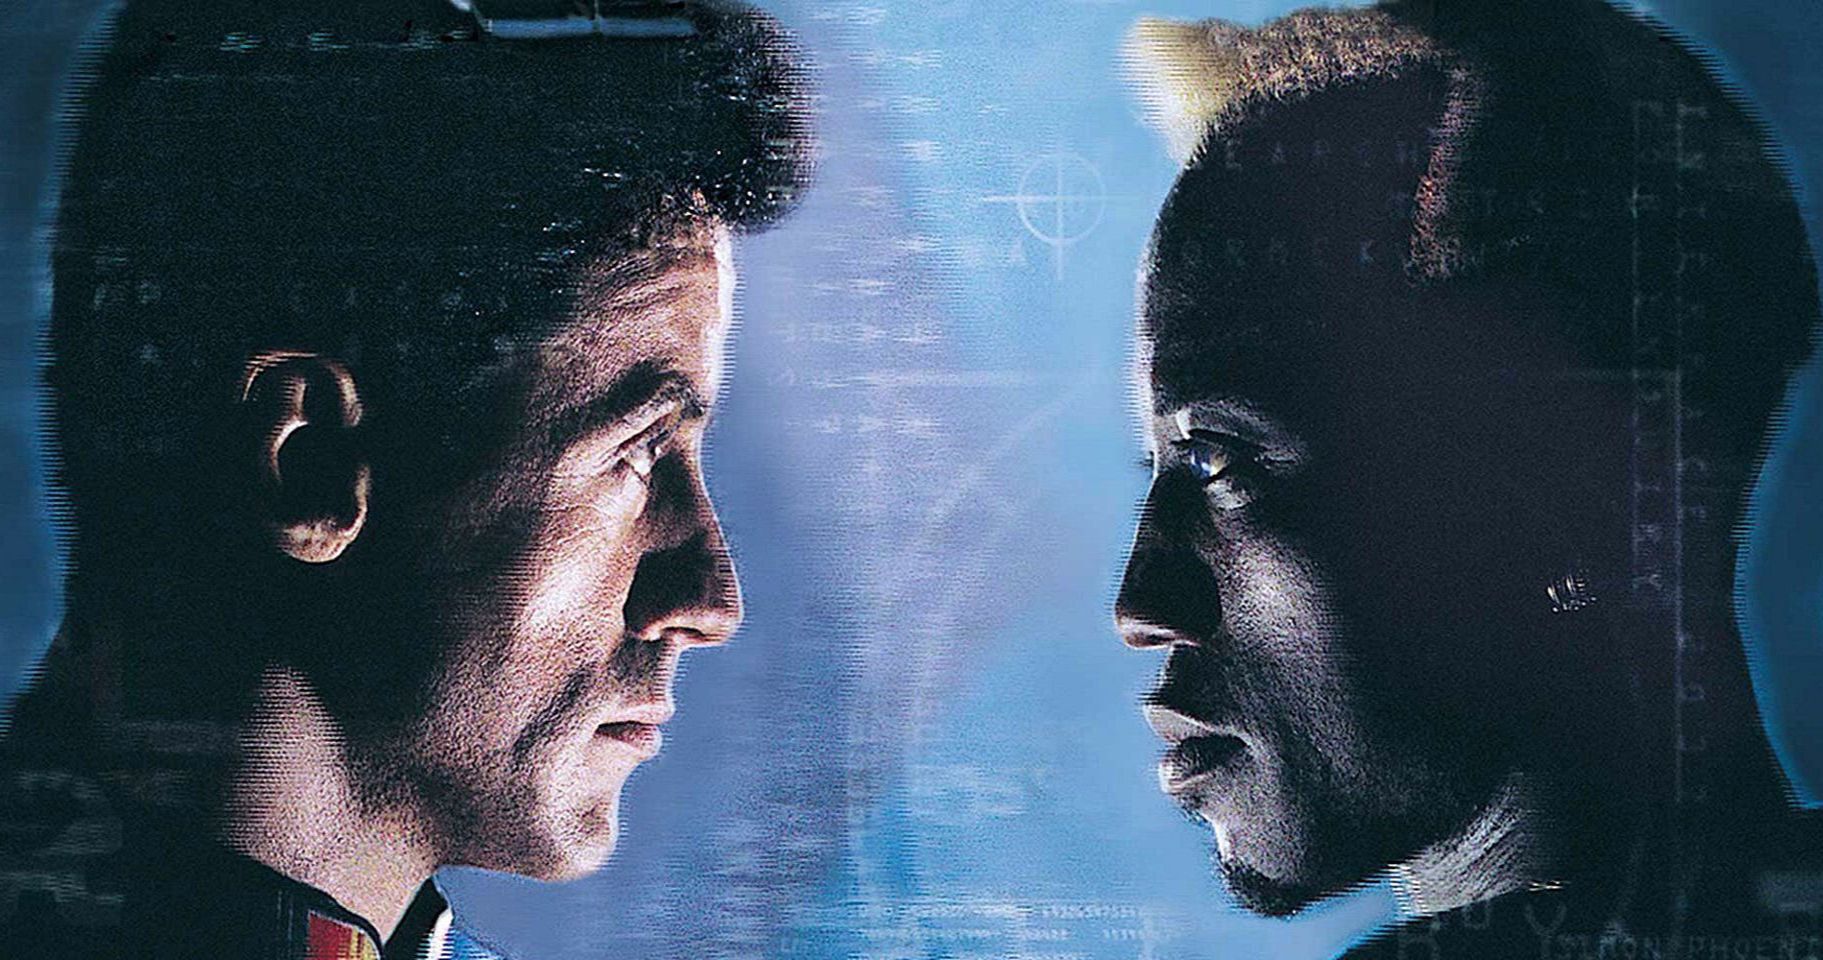 Demolition Man 2 Is Coming and It's Looking Fantastic Says Sylvester Stallone